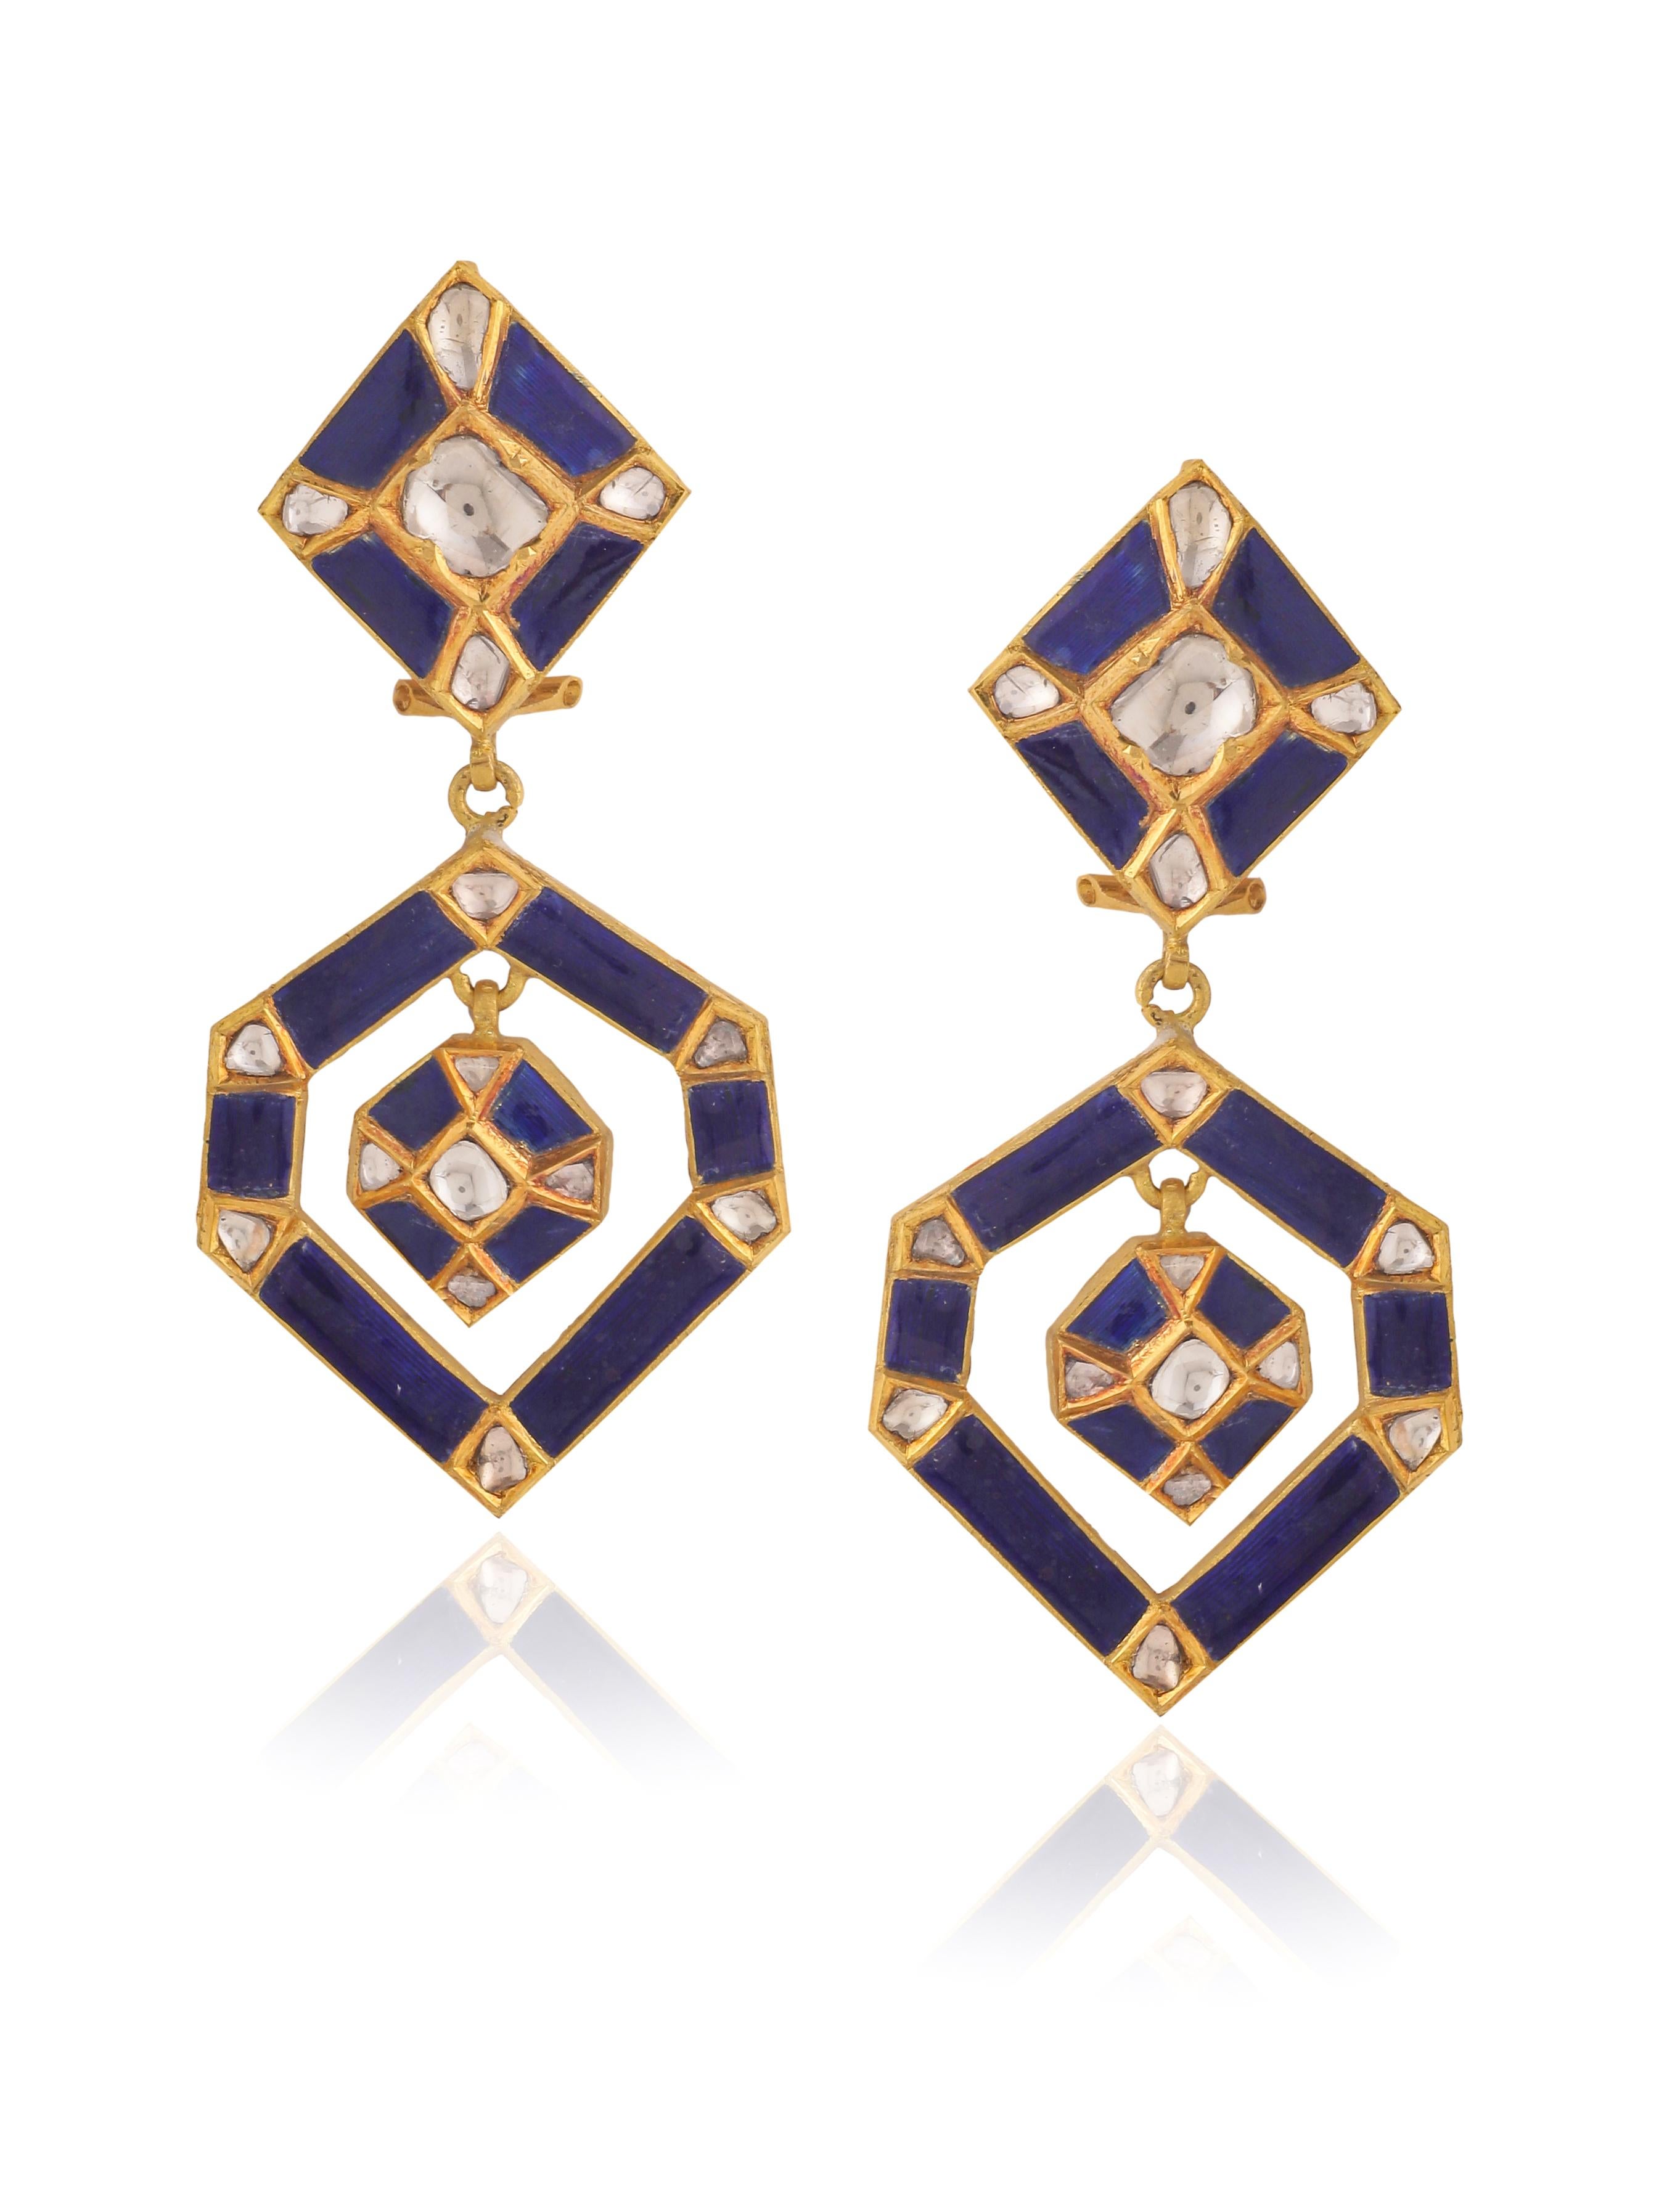 Art Deco Geometrical Earrings Handcrafted in 18K Gold with Diamond and Fine Enamel Work For Sale